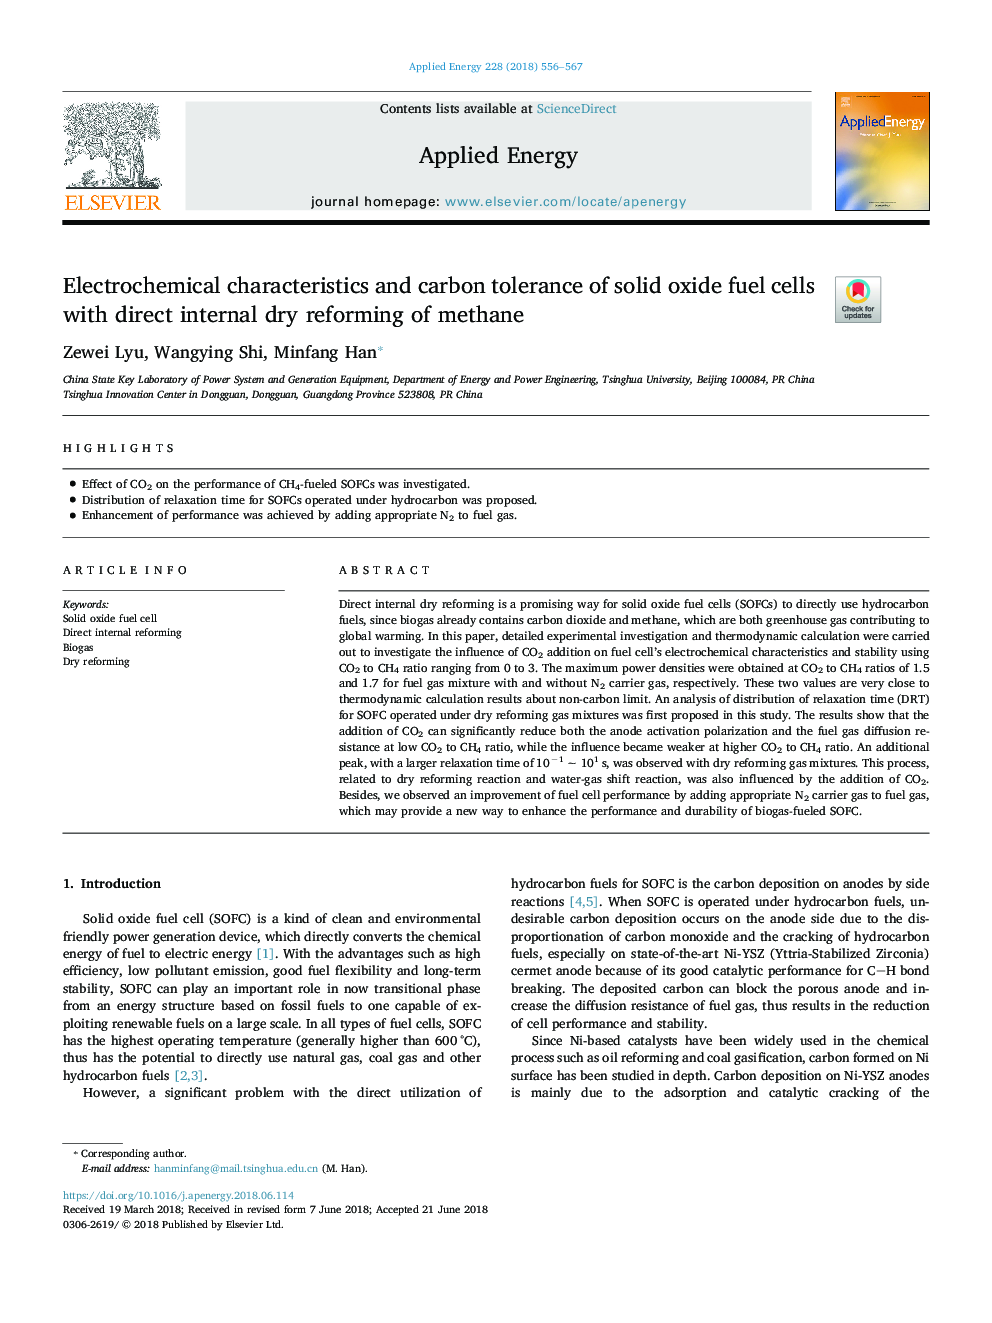 Electrochemical characteristics and carbon tolerance of solid oxide fuel cells with direct internal dry reforming of methane